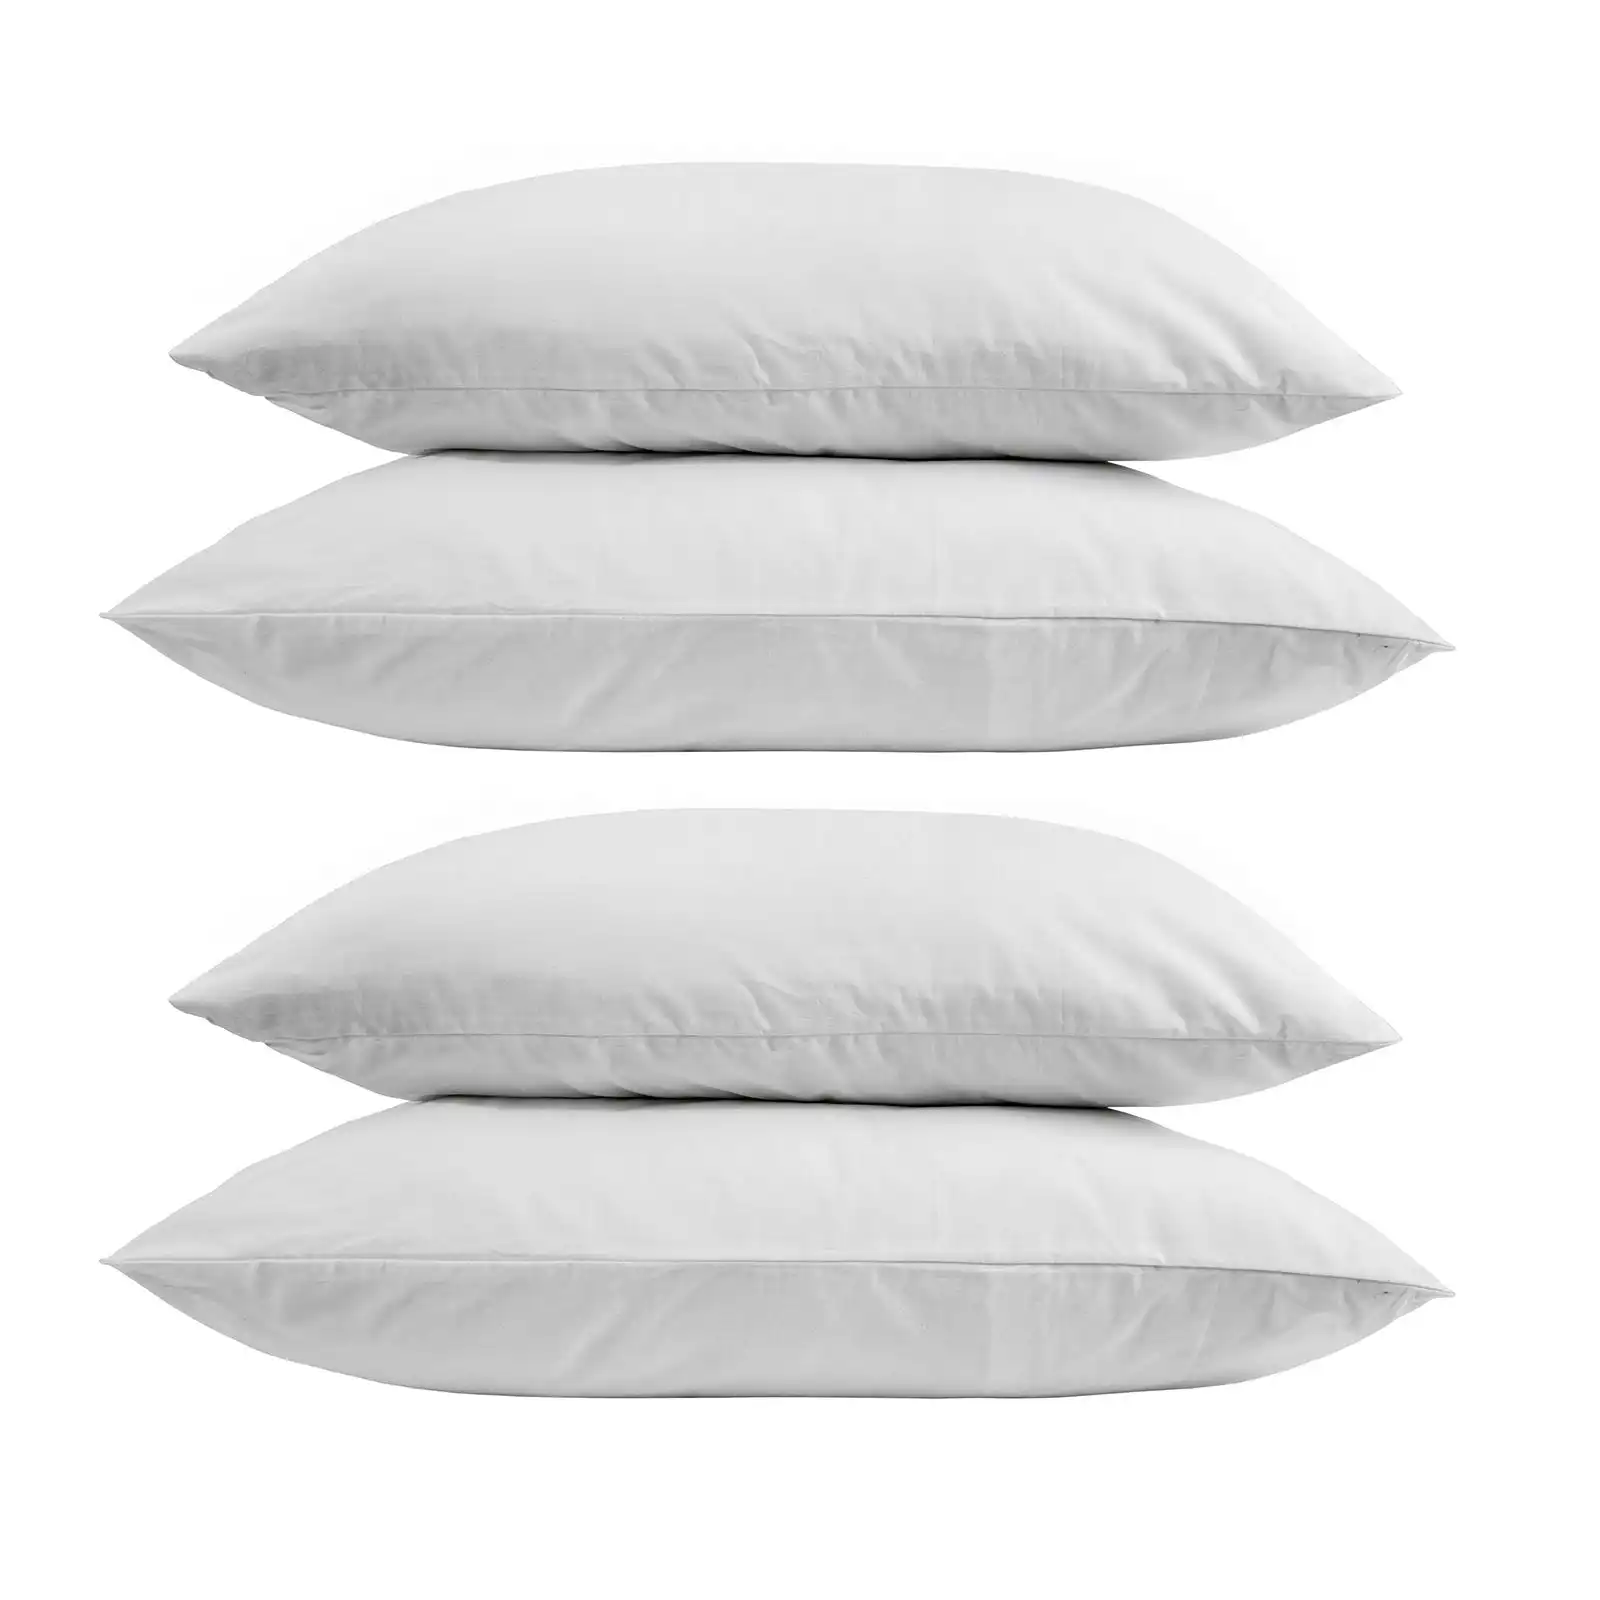 Royal Comfort Goose Feather Down Pillows 1000GSM 4 Pack Hotel Quality